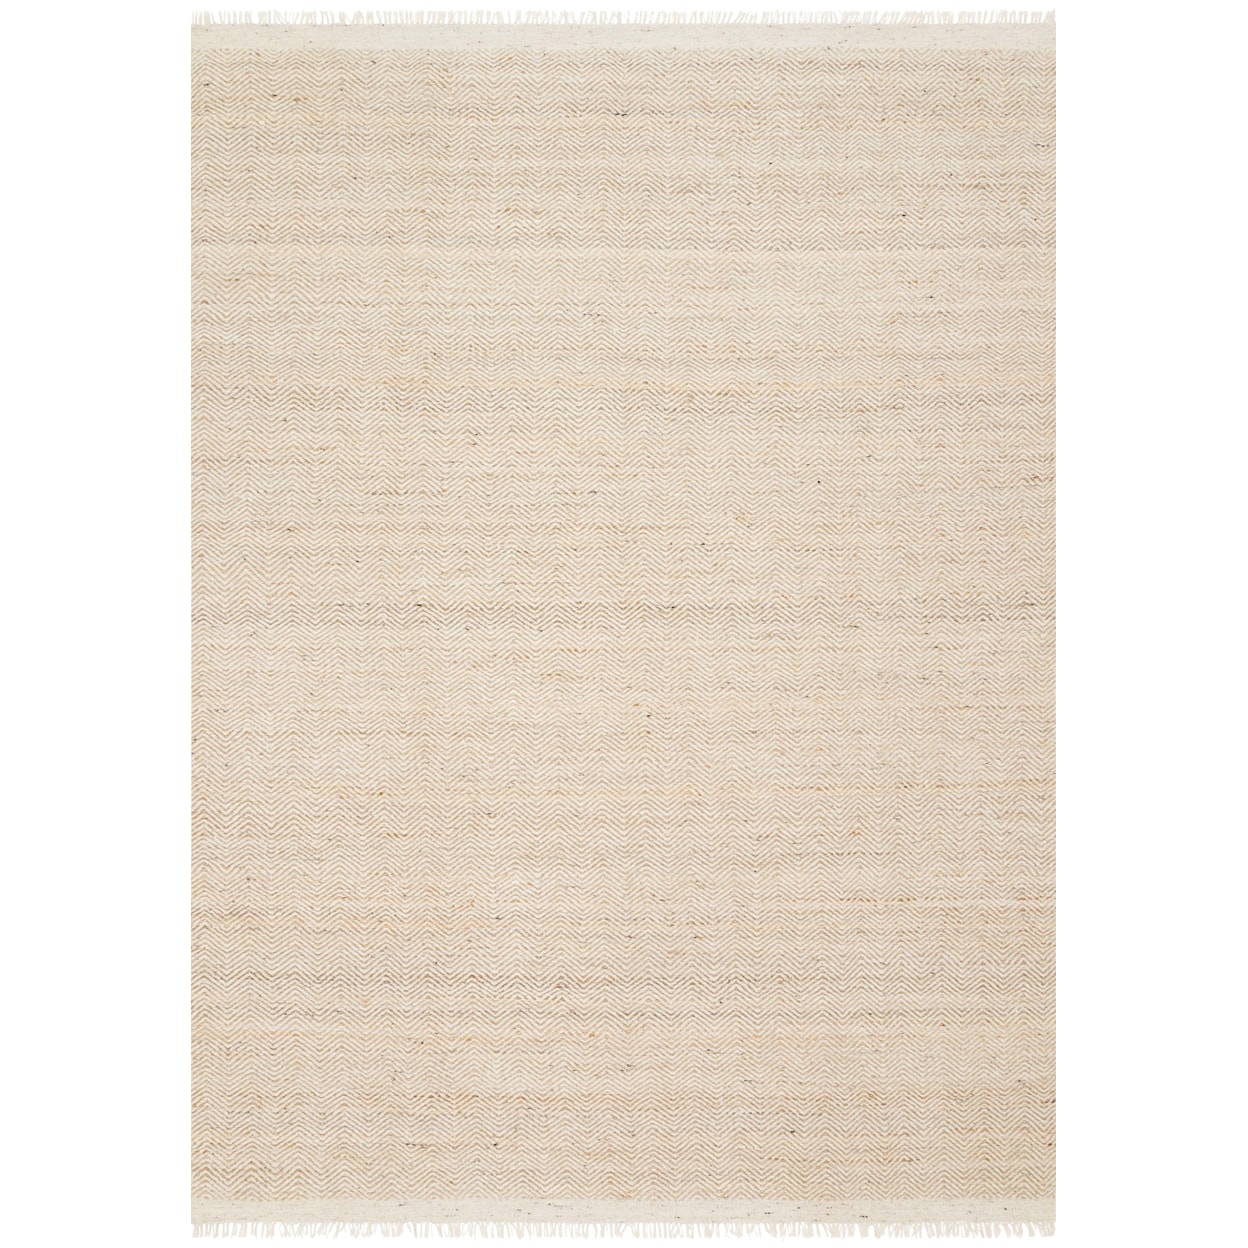 Loloi Rugs Omen 3'6" x 5'6" Natural Rug